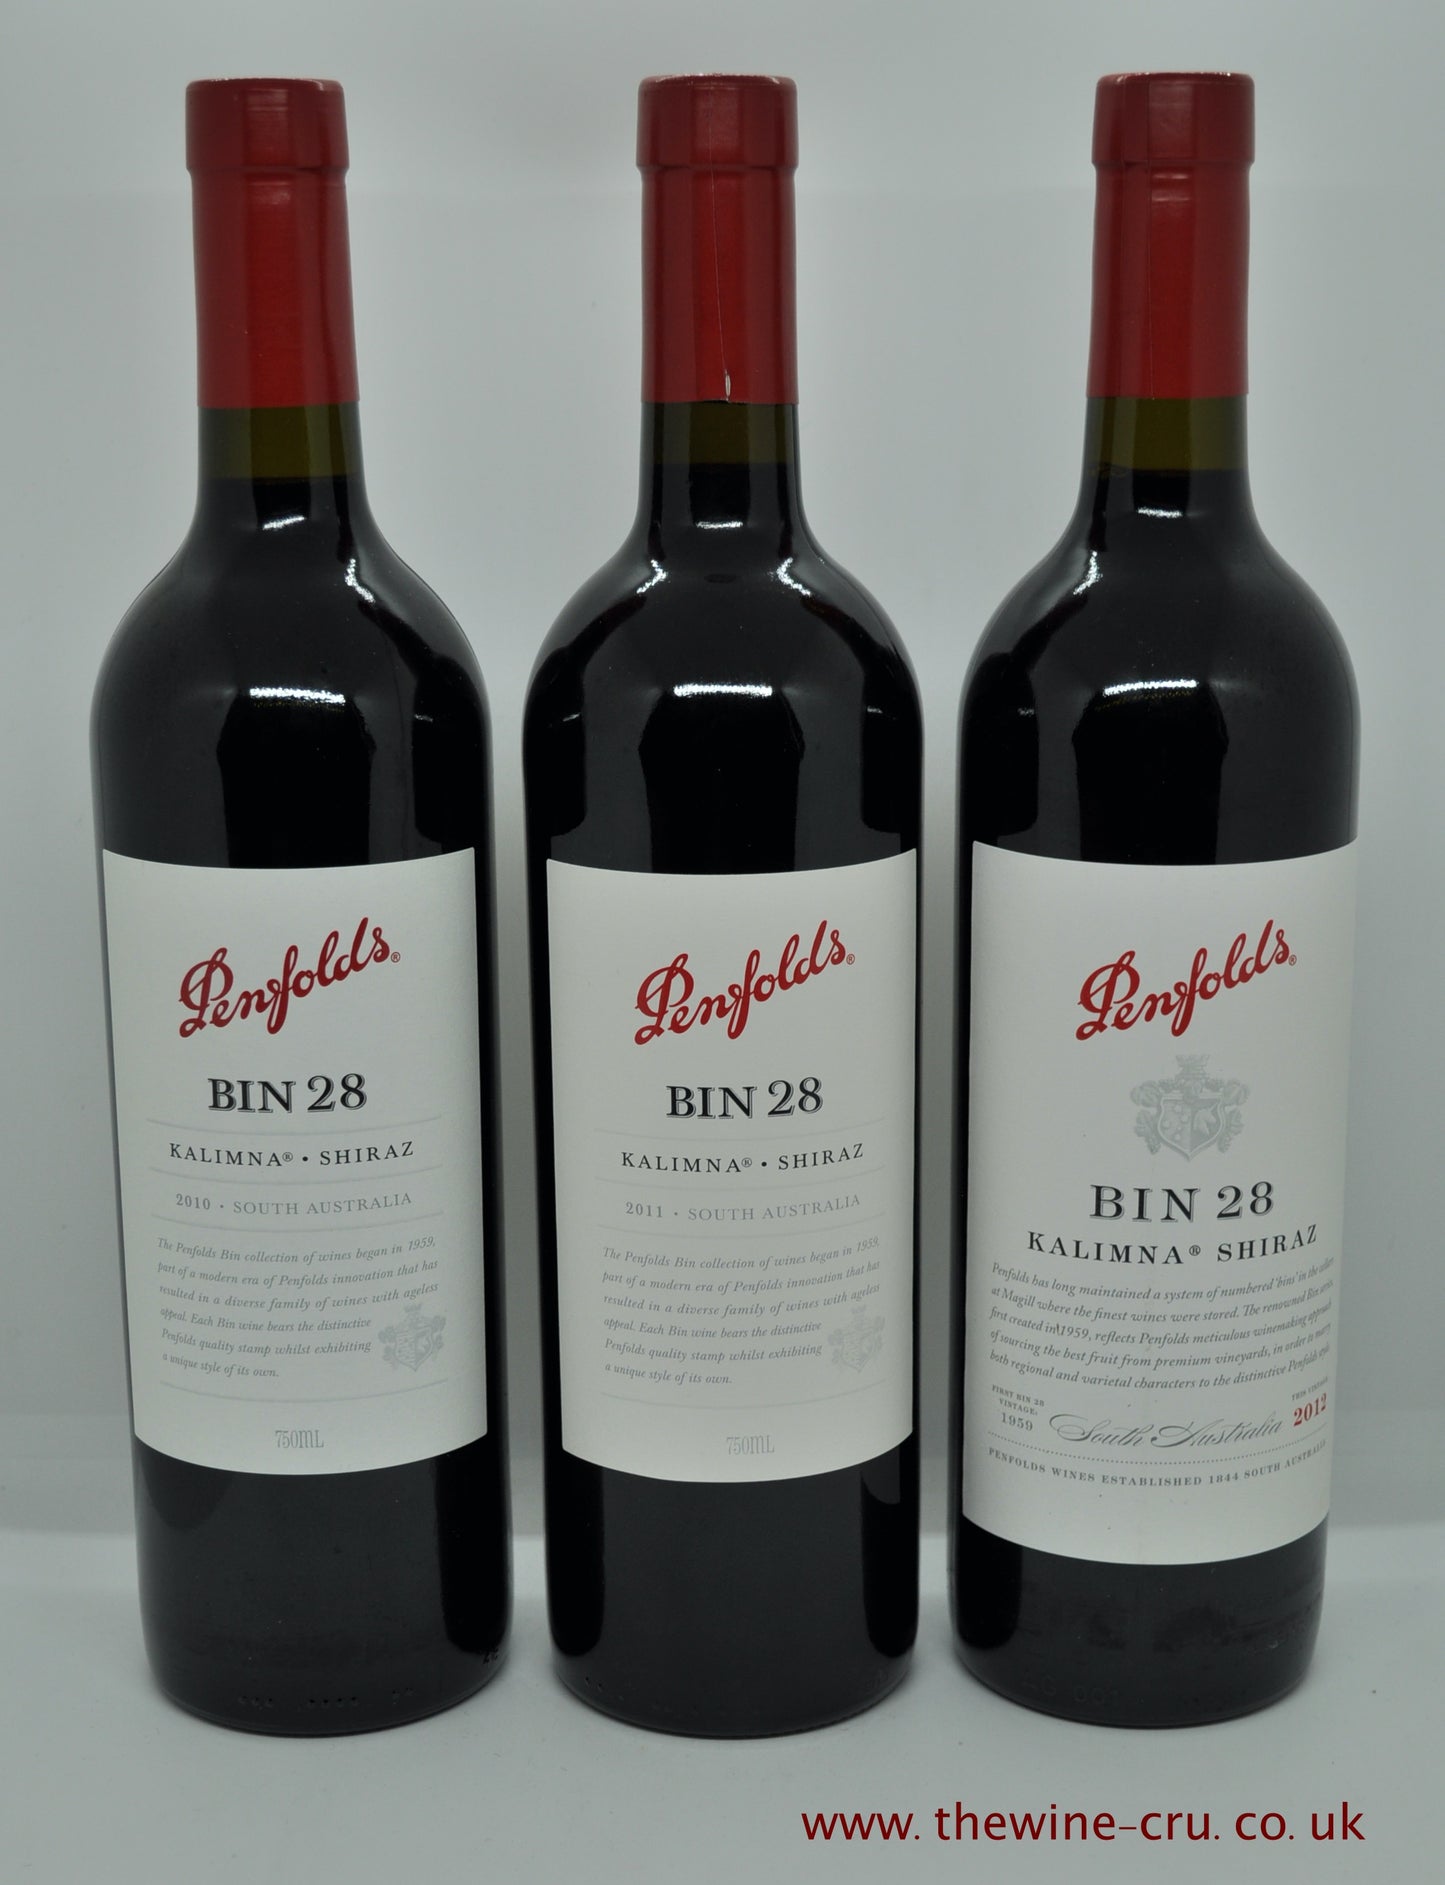 2010, 2011, 2012 vintage red wine. Penfolds Kalimna Shiraz  Tasting package. Australia. Immediate delivery. Free local delivery. Gift wrapping available.